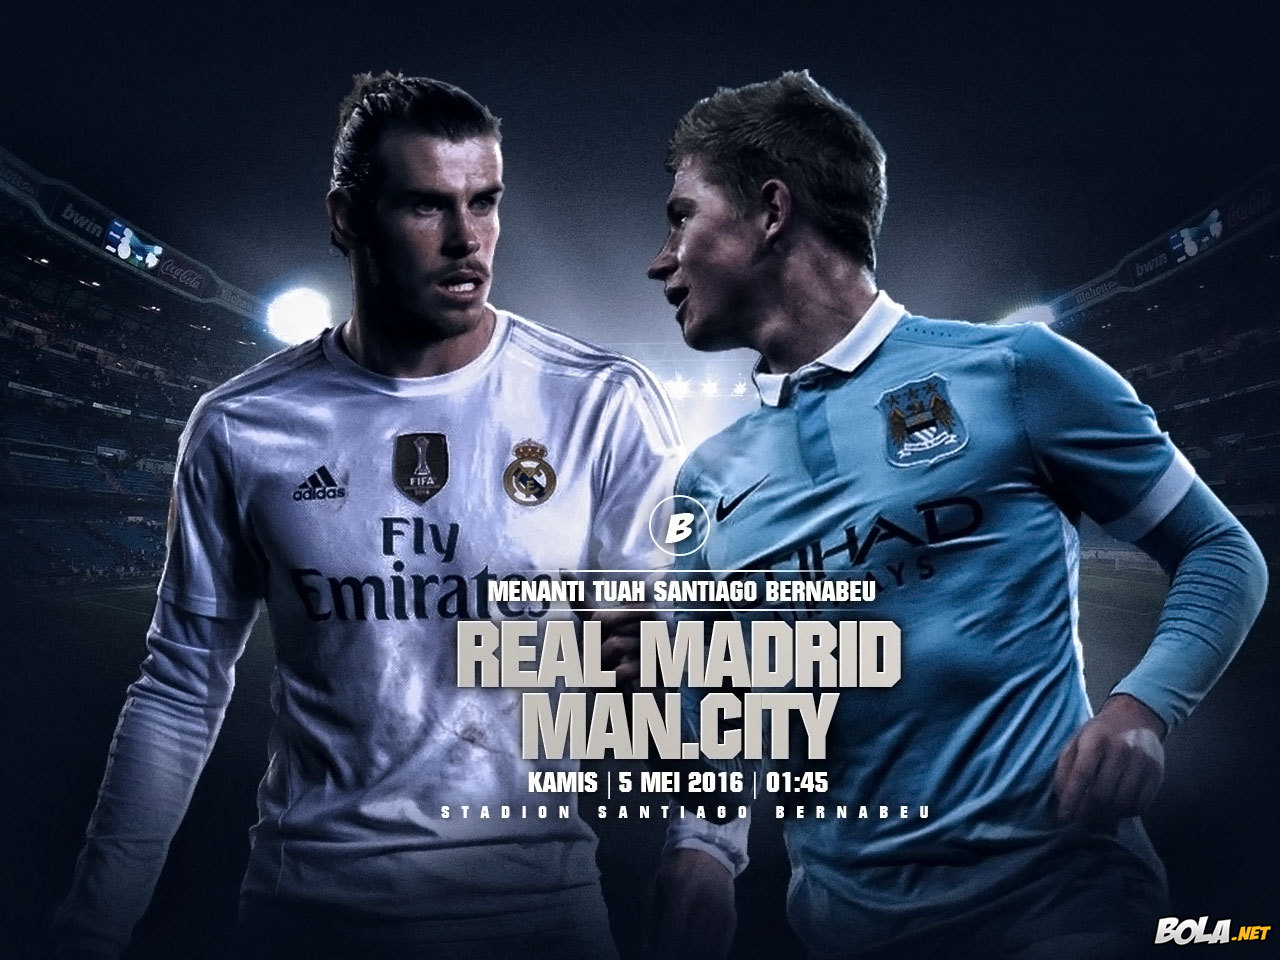 Download Wallpaper Real Madrid Vs Manchester City Bolanet